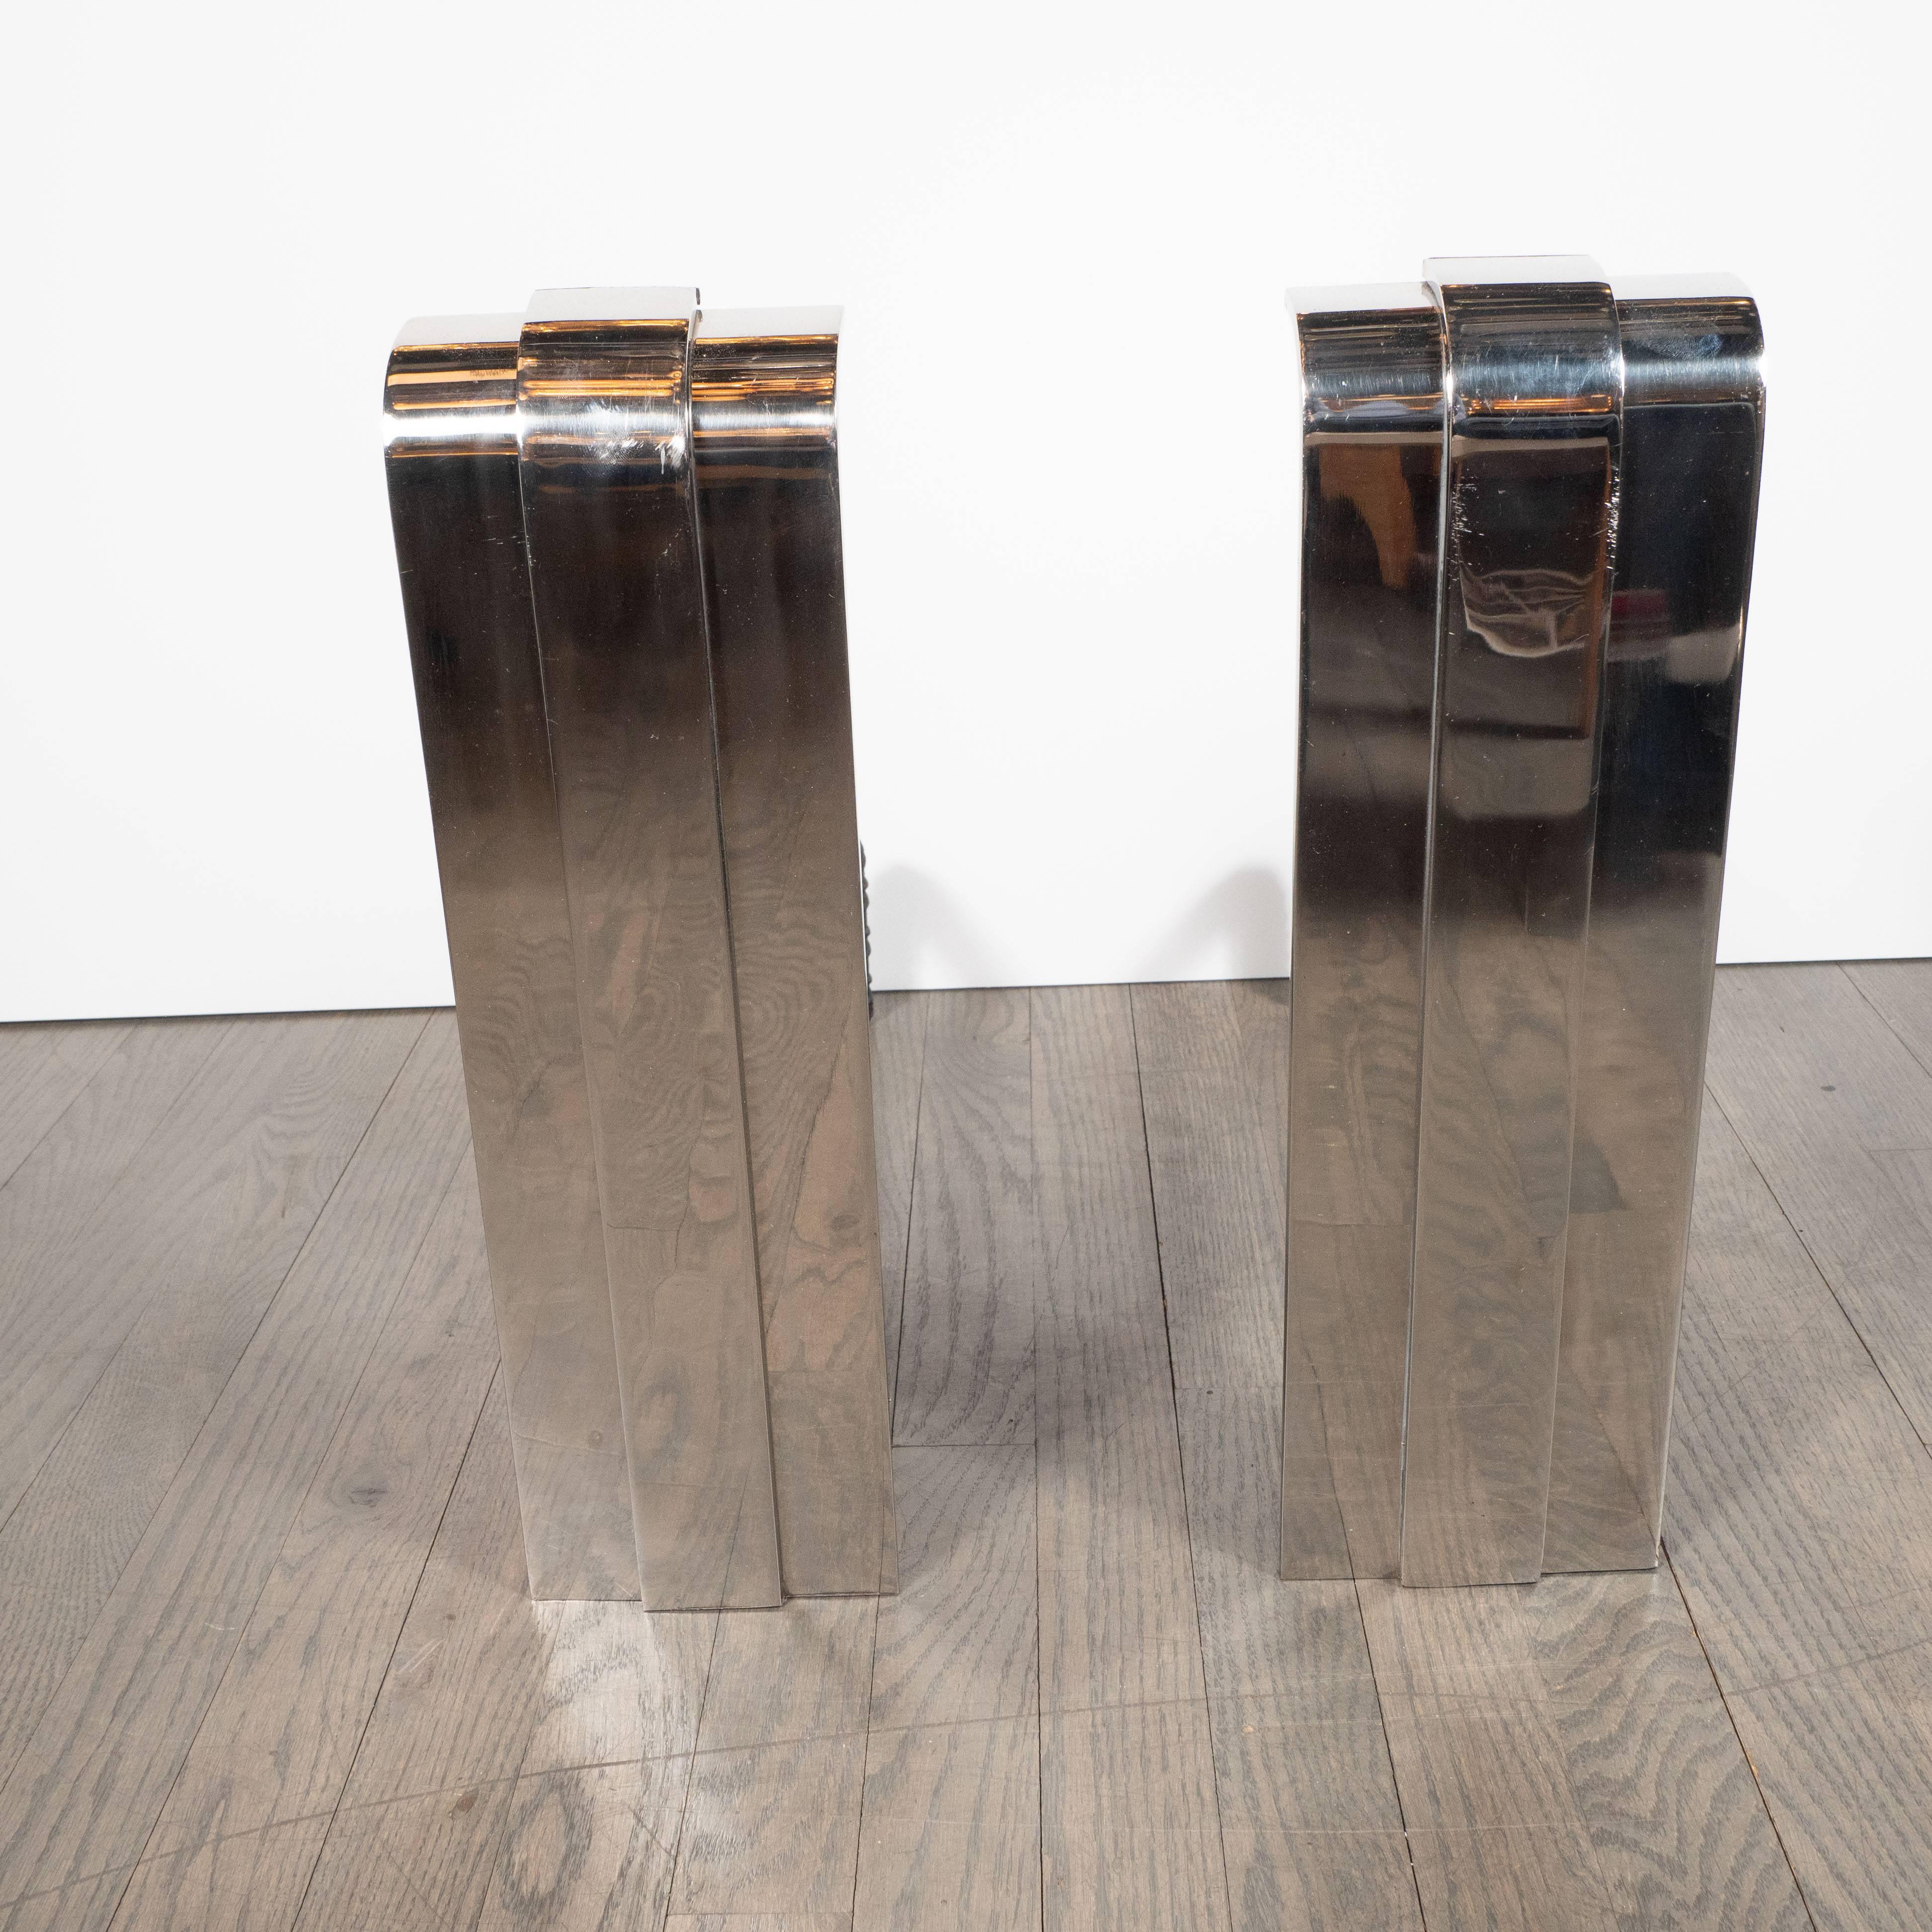 Handmade by artisans in New York state, this pair of modernist andirons embody the old world craftsmanship and design aesthetic of a bygone era. With their skyscraper style construction, they consist of three polished nickel bands, of which the